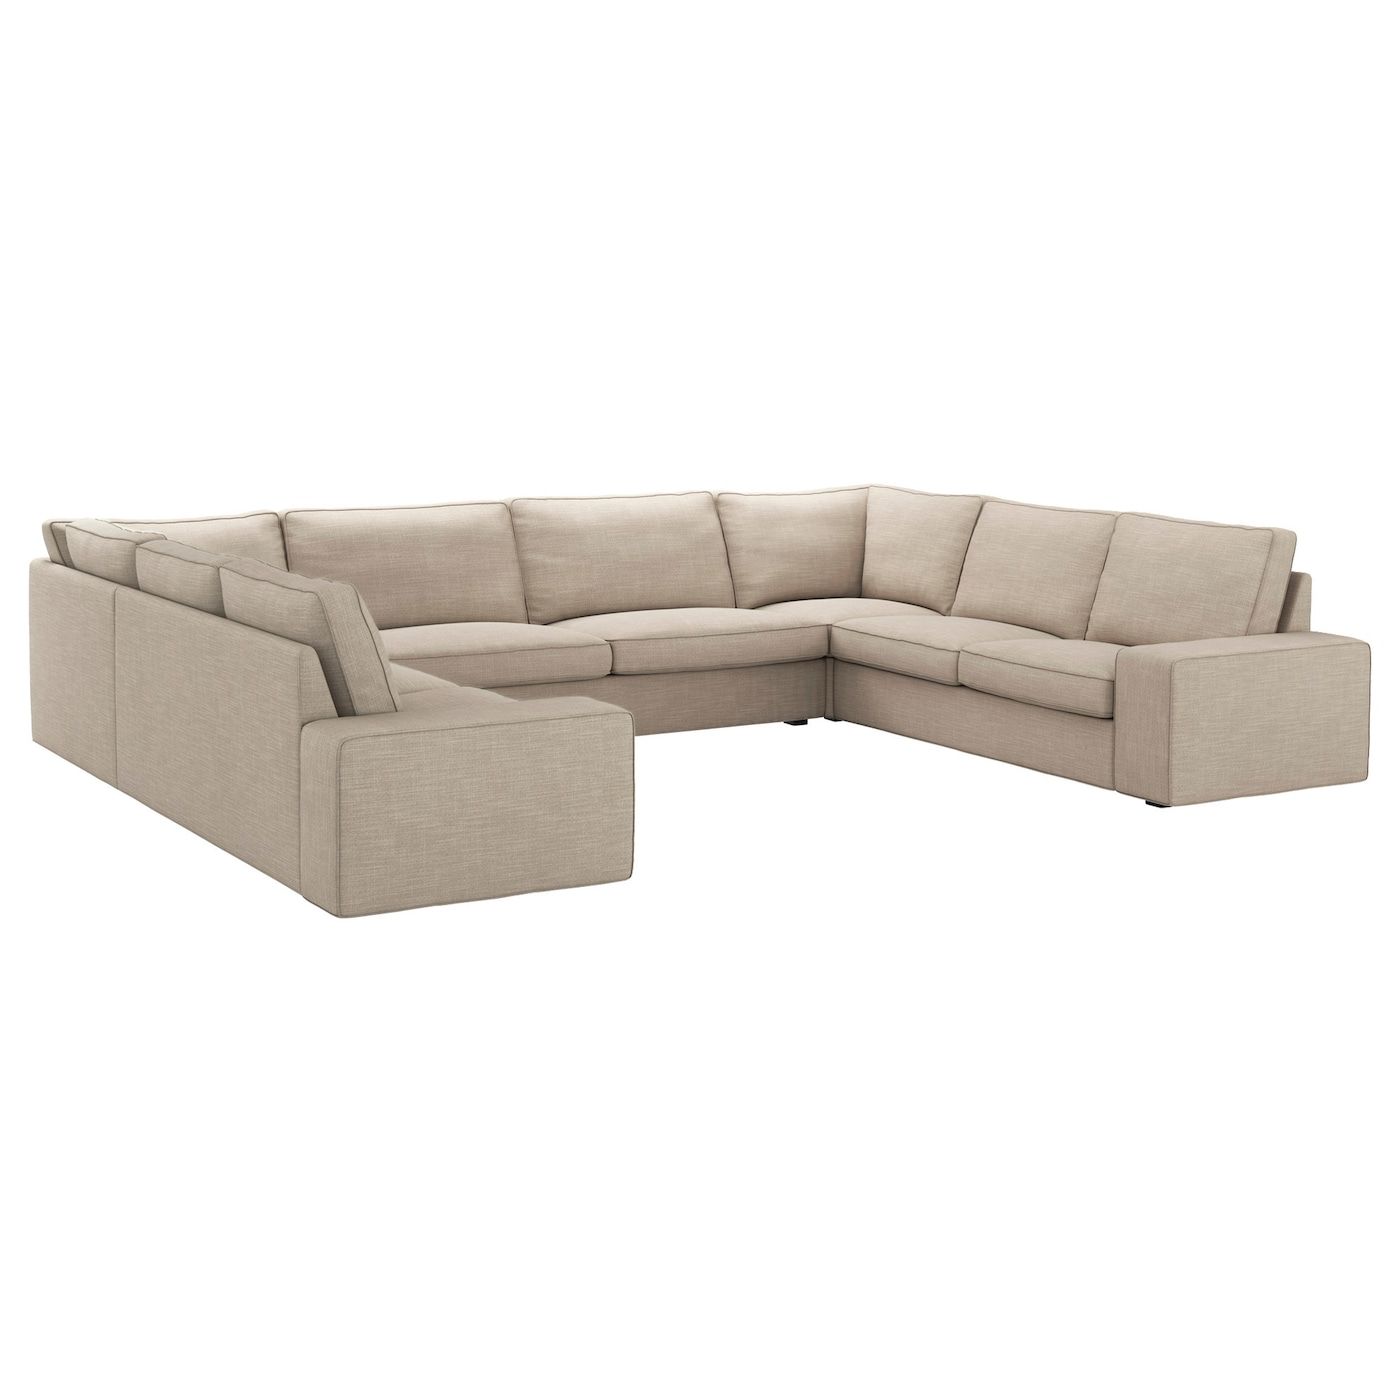 2018 Kivik Canapé En U, 6 Places – Hillared 9 Places Beige – Ikea In U Shaped Couches In Beige (Photo 1 of 15)